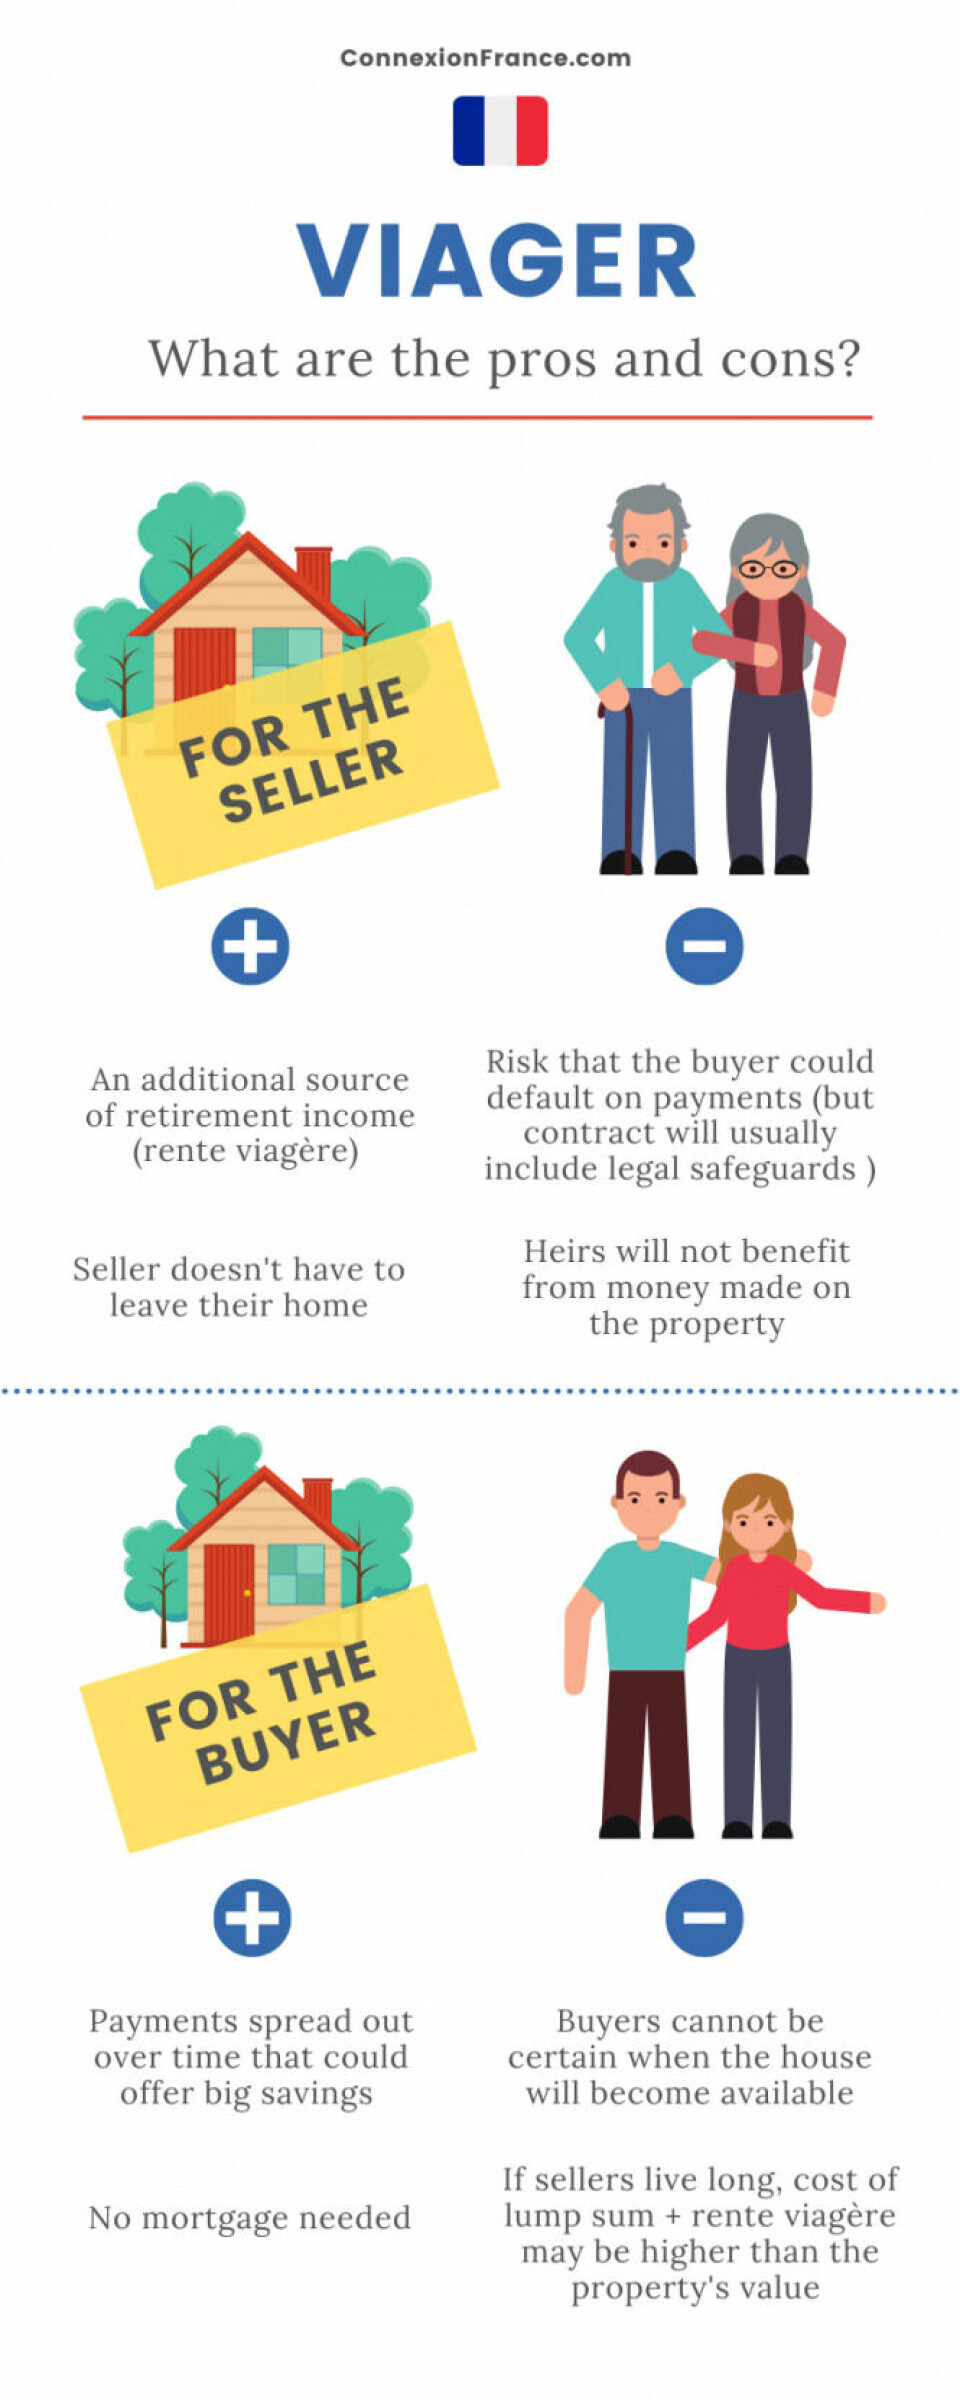 An infographic showing the pros and cons of buying or selling property en viager in France